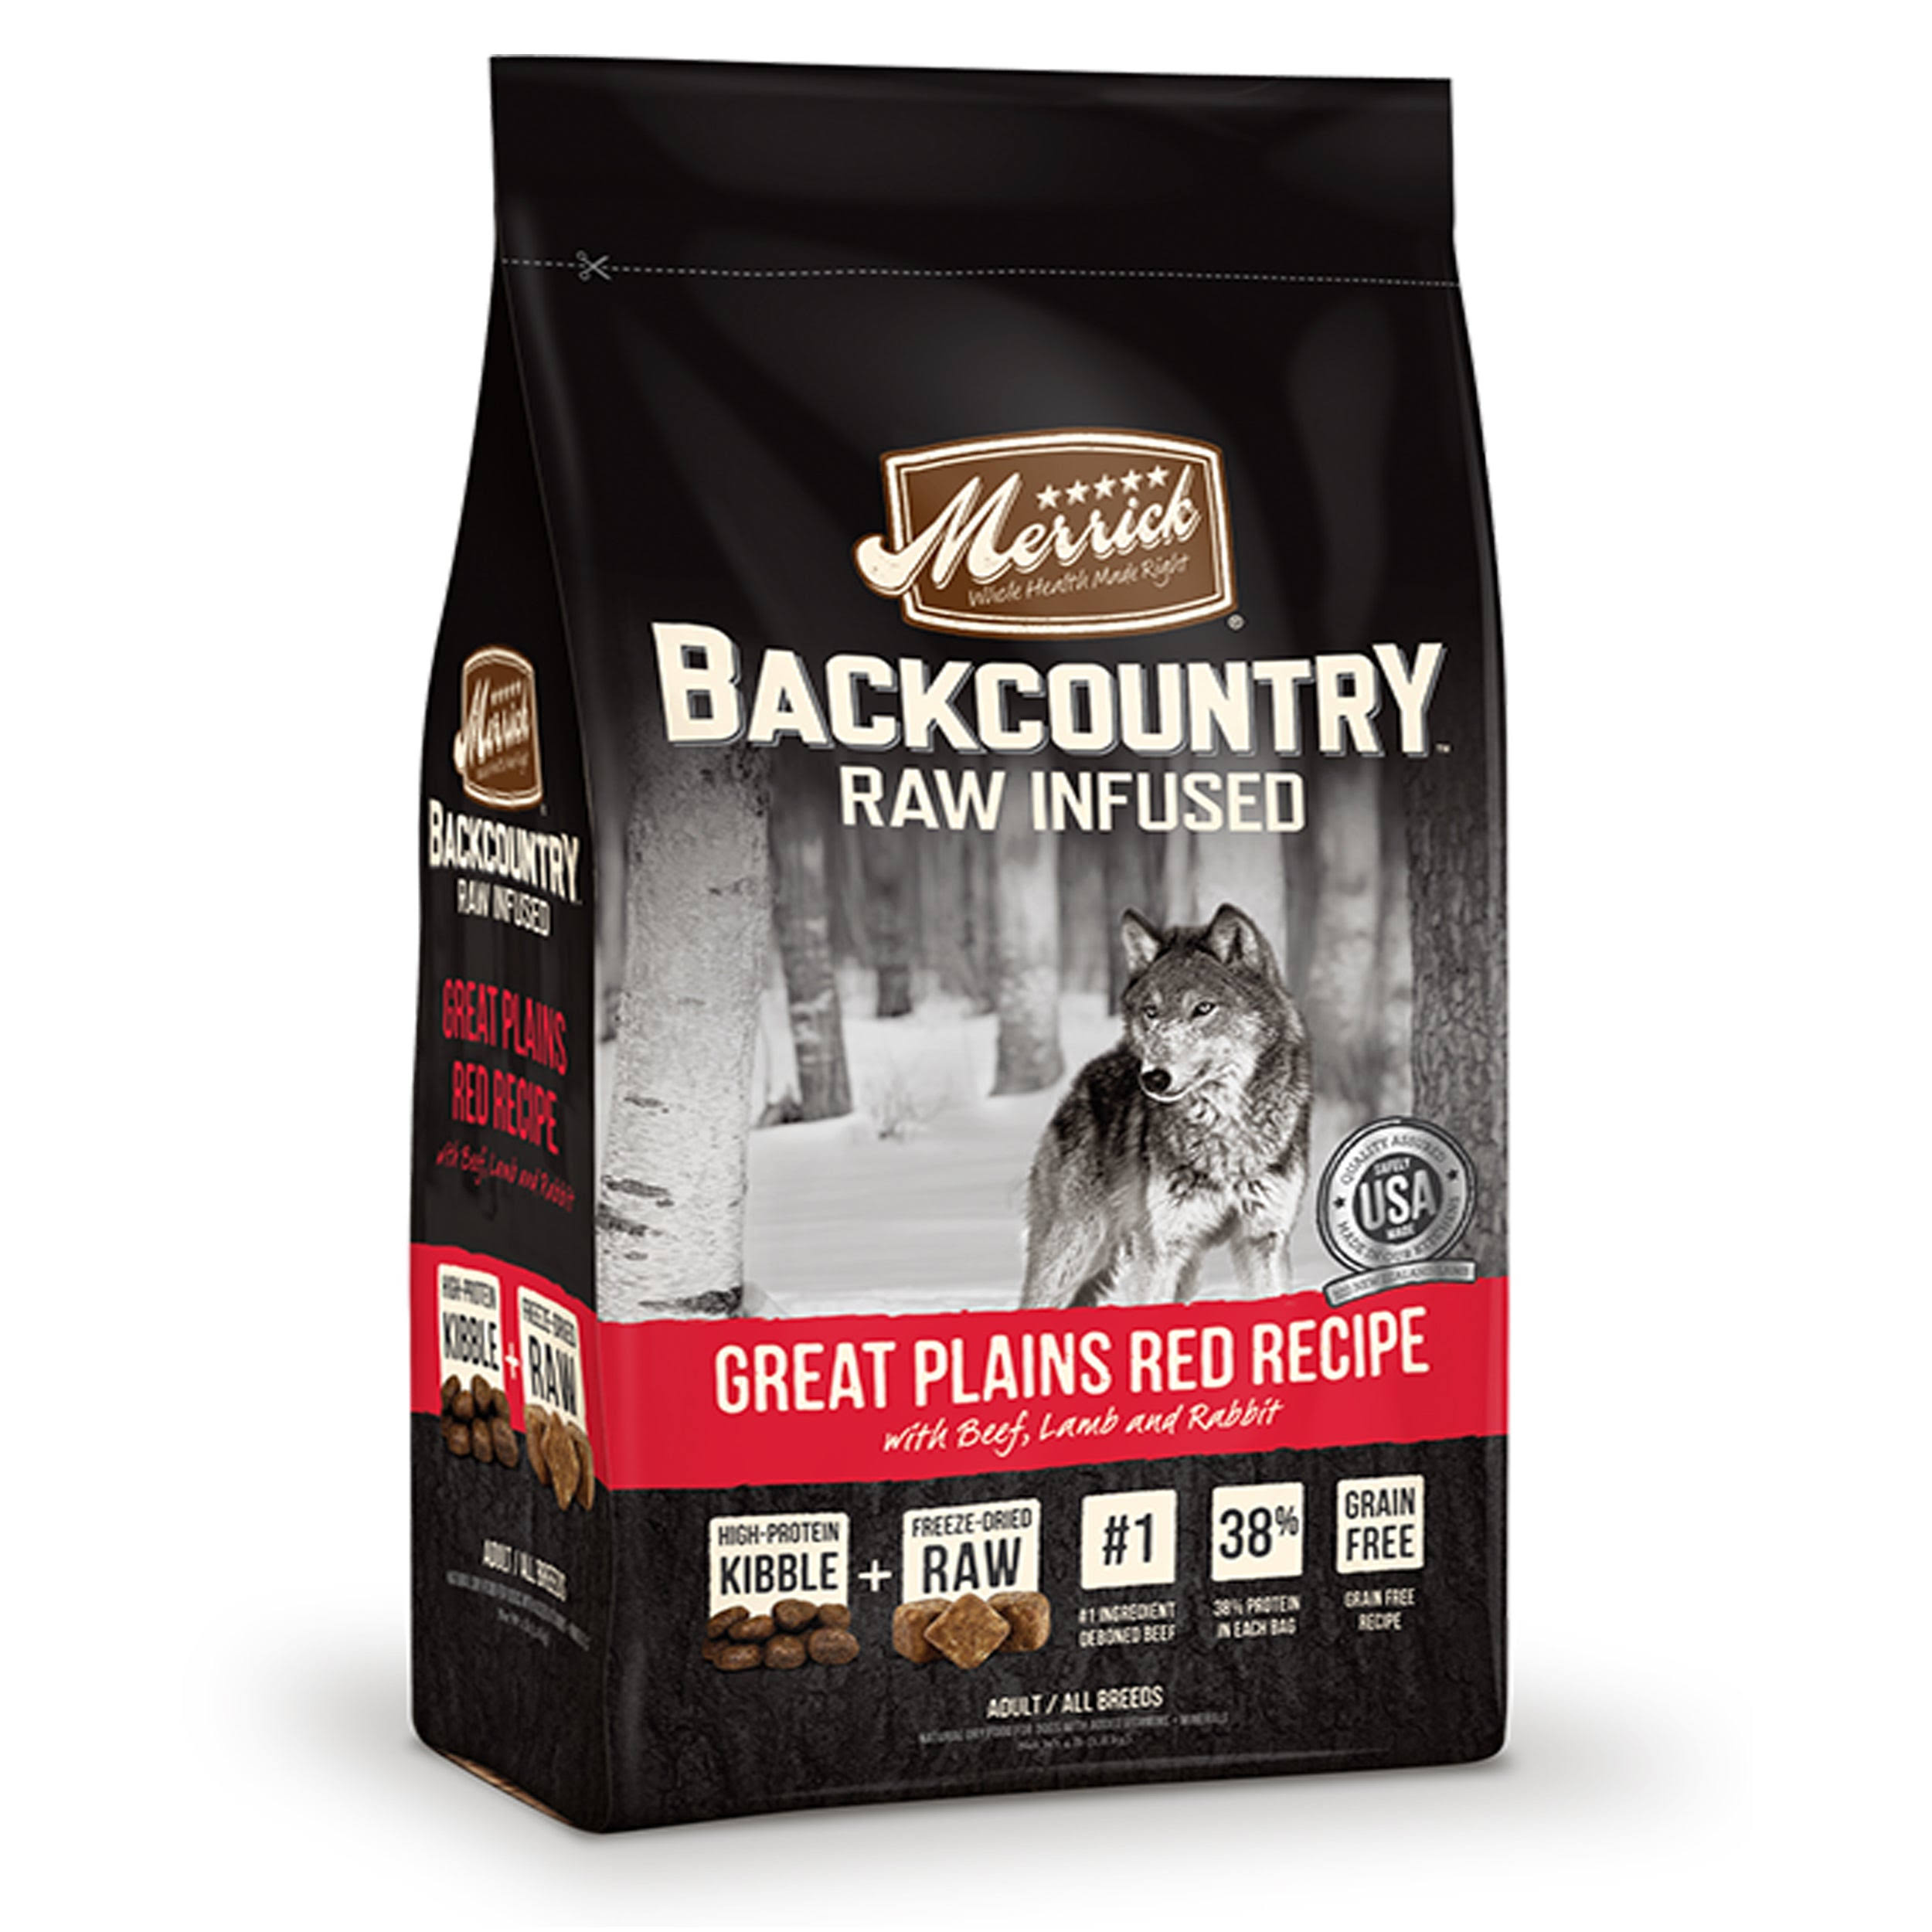 Merrick Backcountry Raw Infused Grain-Free Dog Food - Great Plains Red Recipe